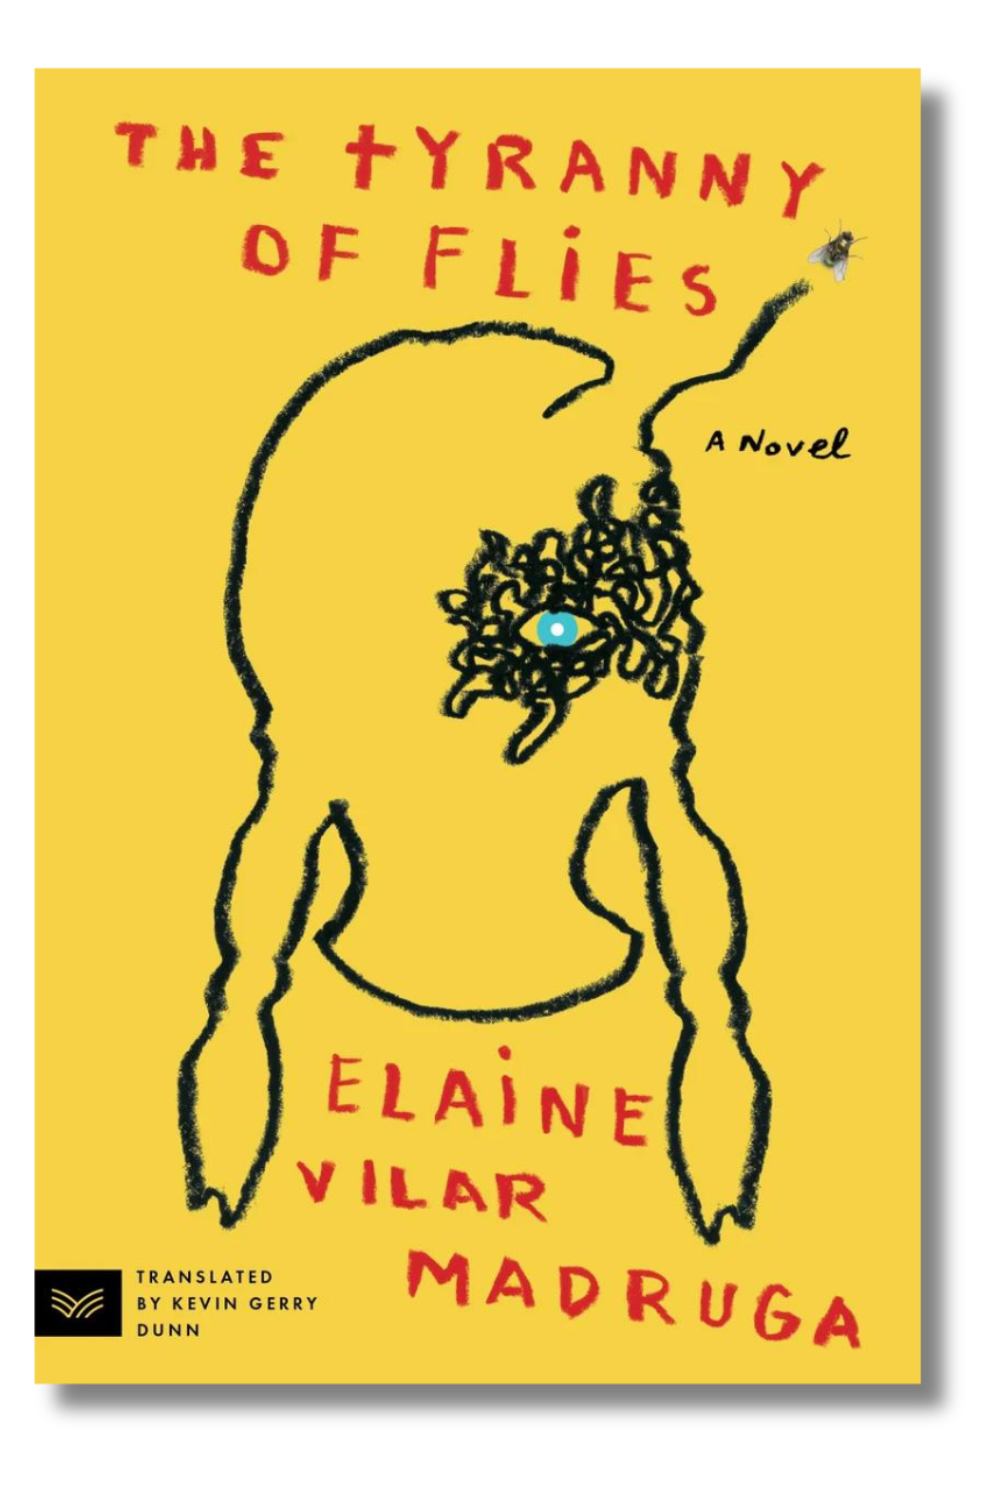 The cover of "The Tyranny of Flies" by Elaine Vilar Madruga, translated by Kevin Gerry Dunn